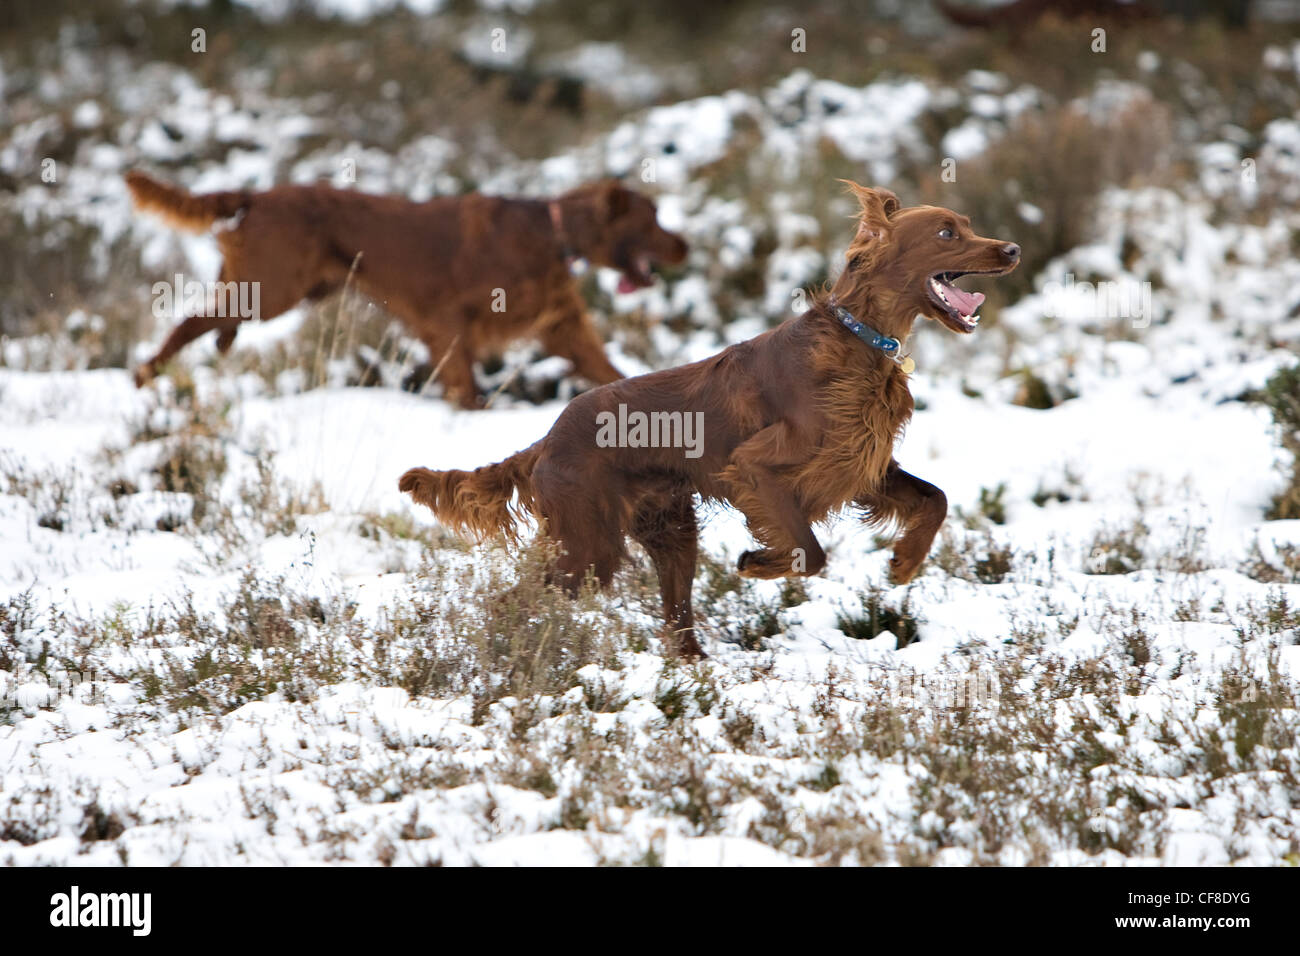 Irish red setter playing in snow, Wiltshire, England Stock Photo